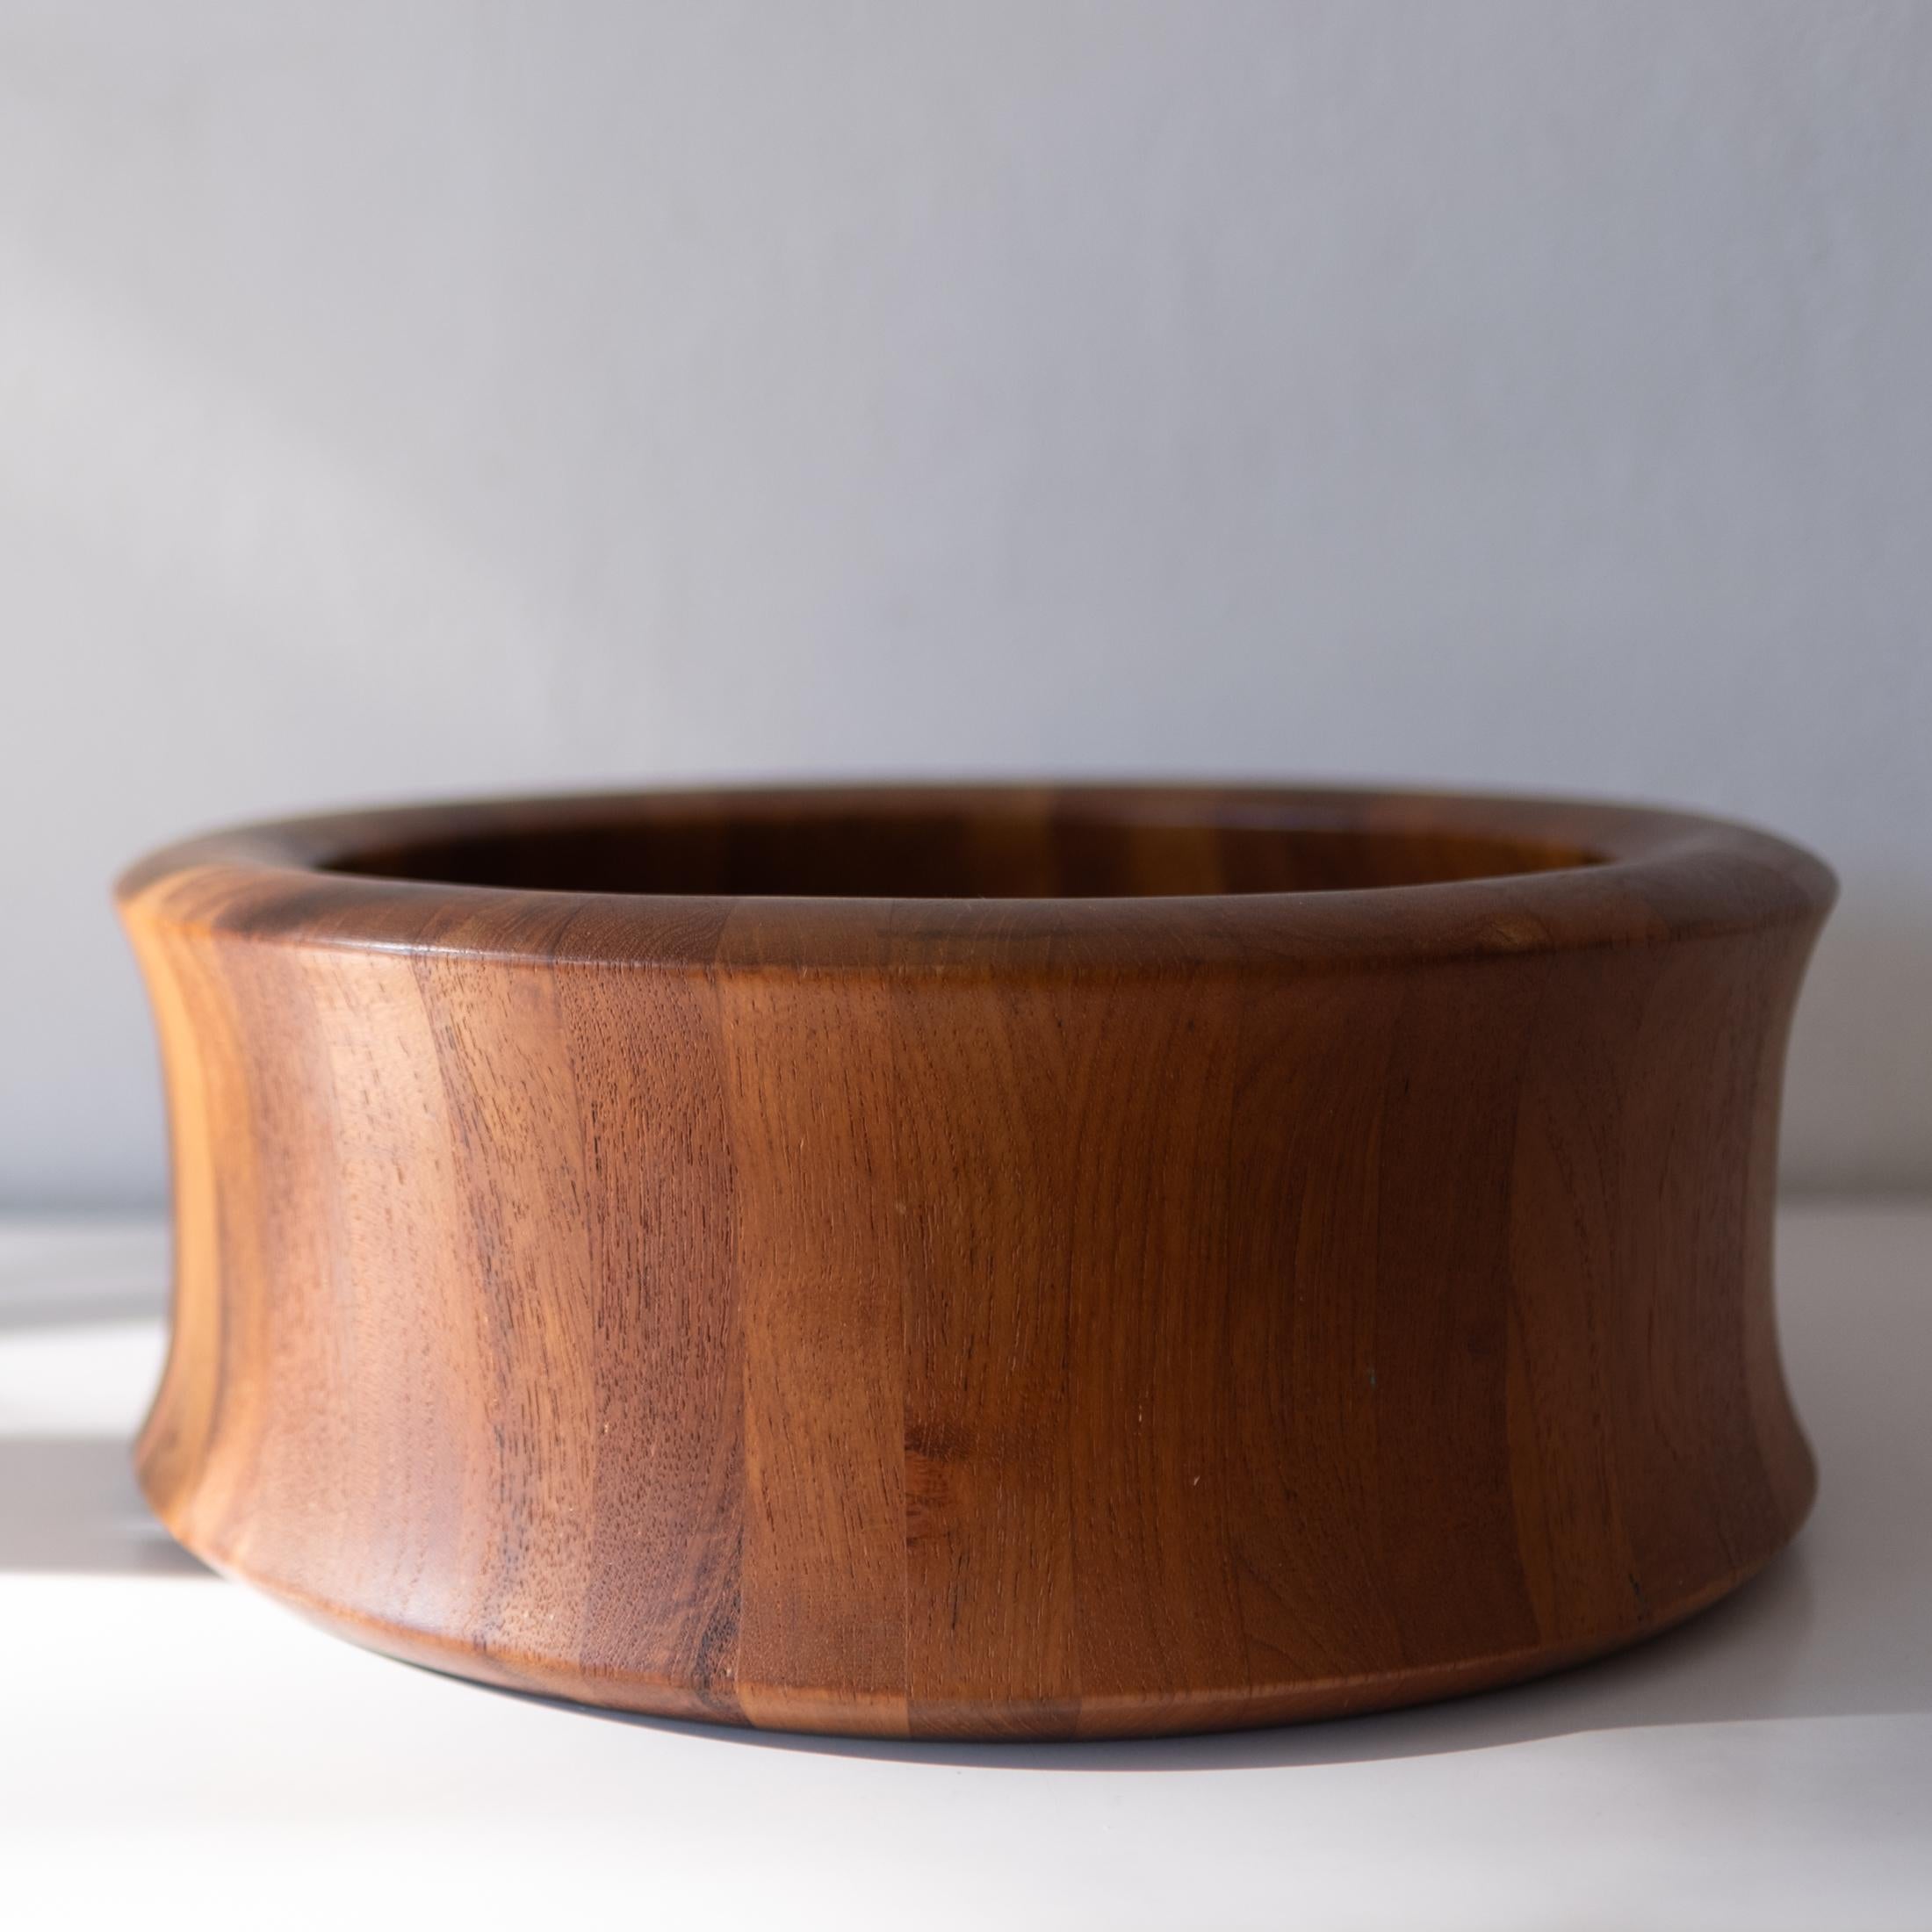 Digsmed Danish Modern Staved Teak Salad Bowl Set  In Good Condition For Sale In San Diego, CA